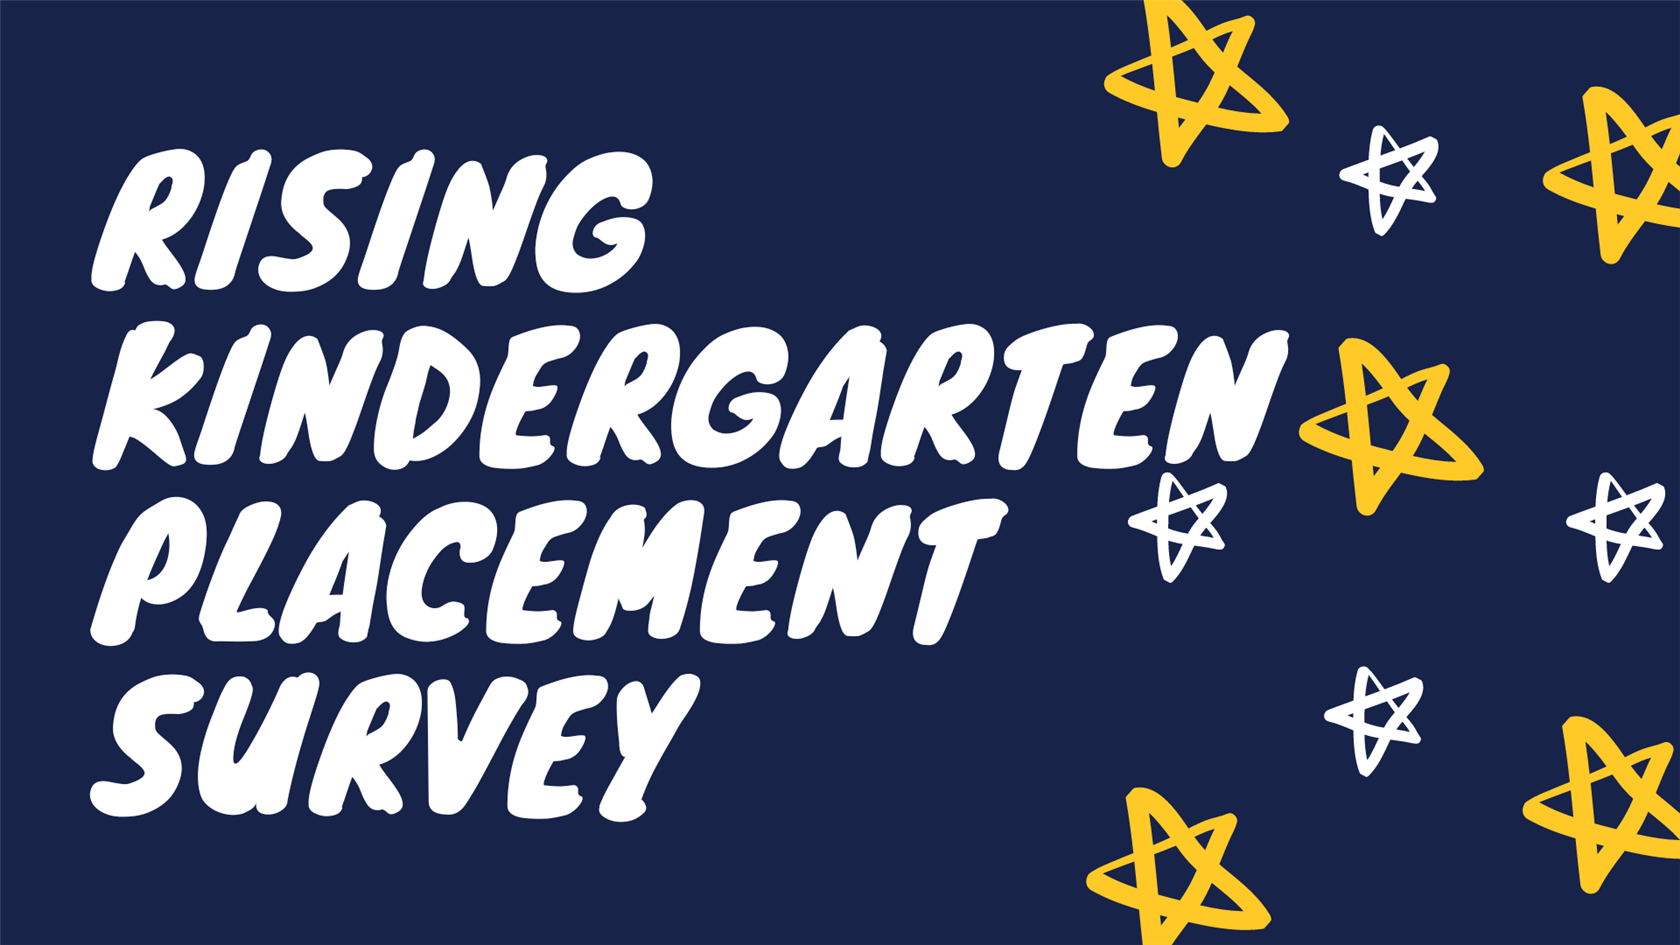  Rising Kindergarten Placement Survey white letters on navy with hand drawn white & yellow stars